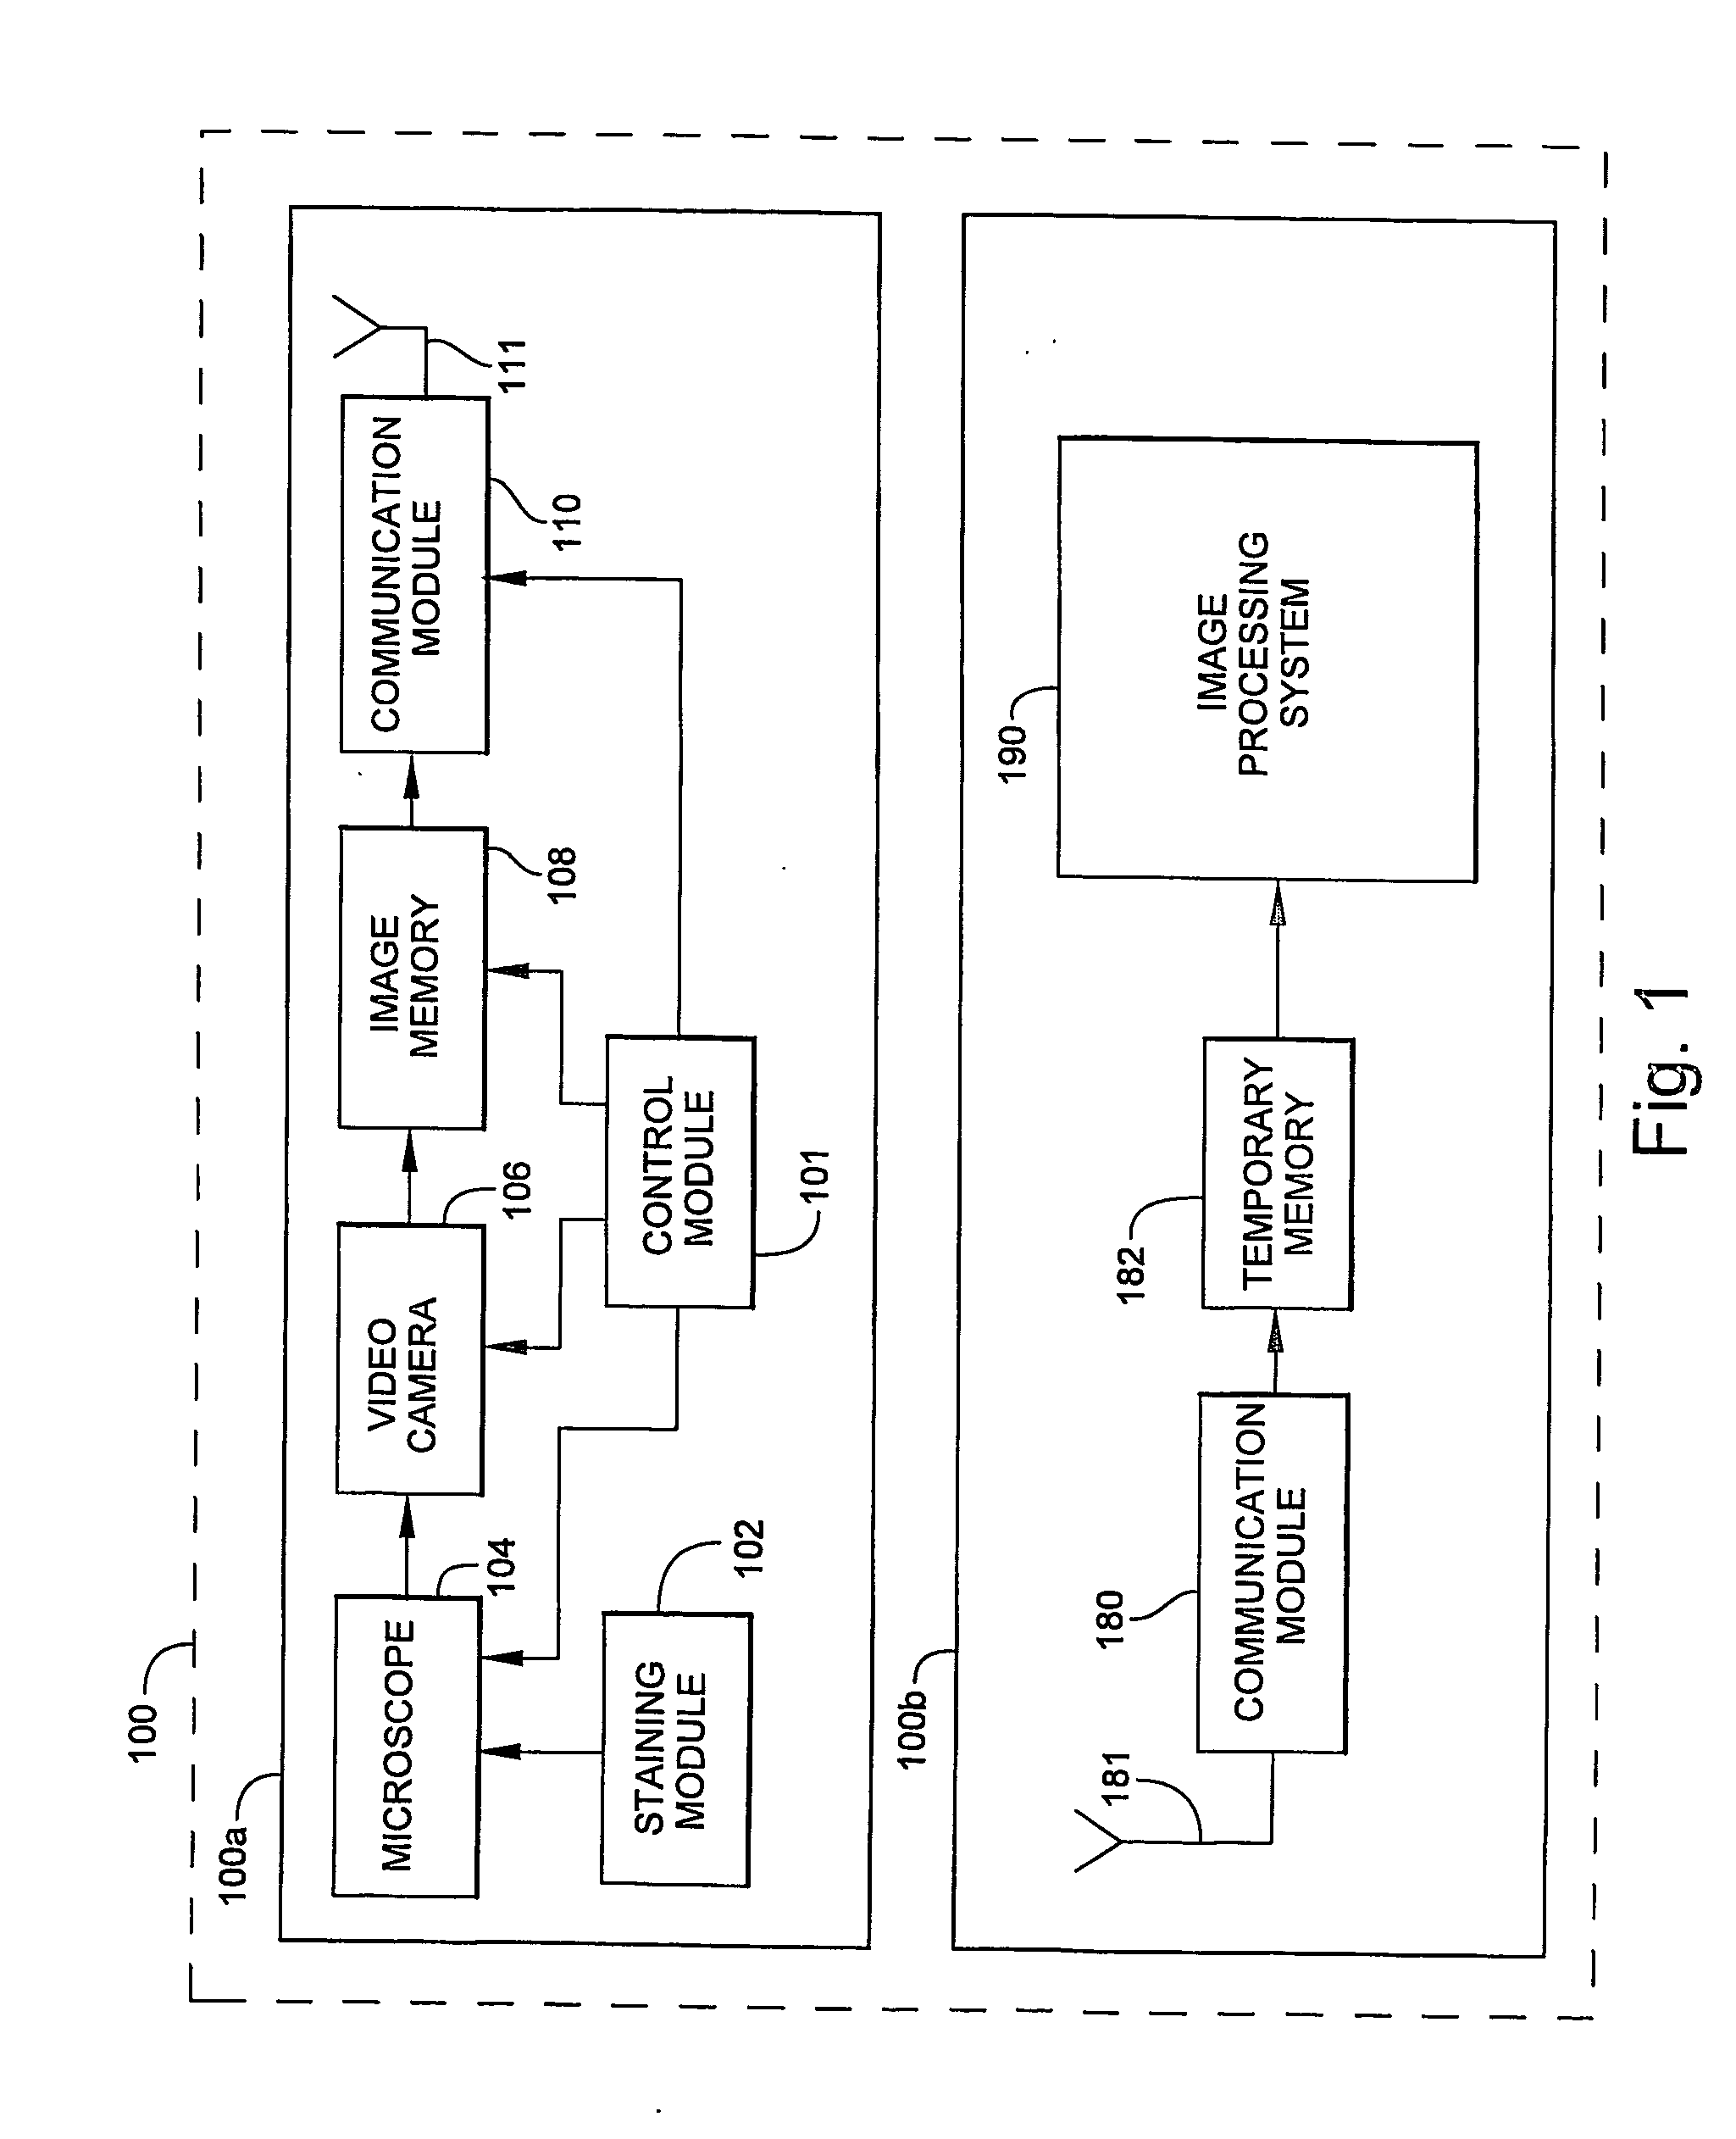 System and method for rapidly identifying pathogens, bacteria and abnormal cells